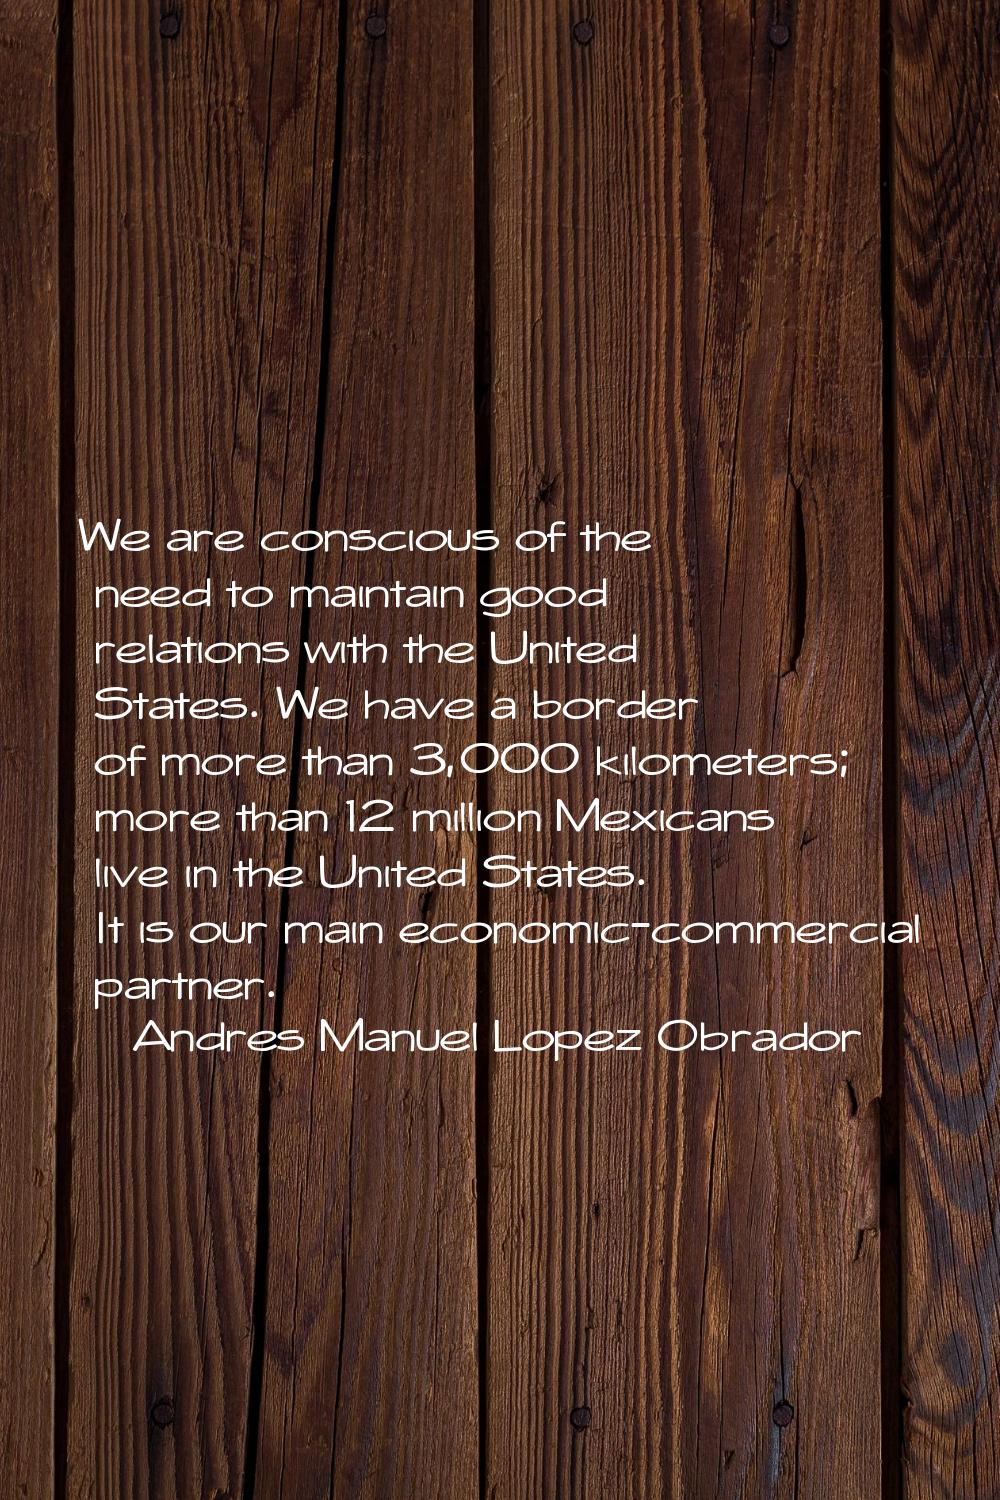 We are conscious of the need to maintain good relations with the United States. We have a border of